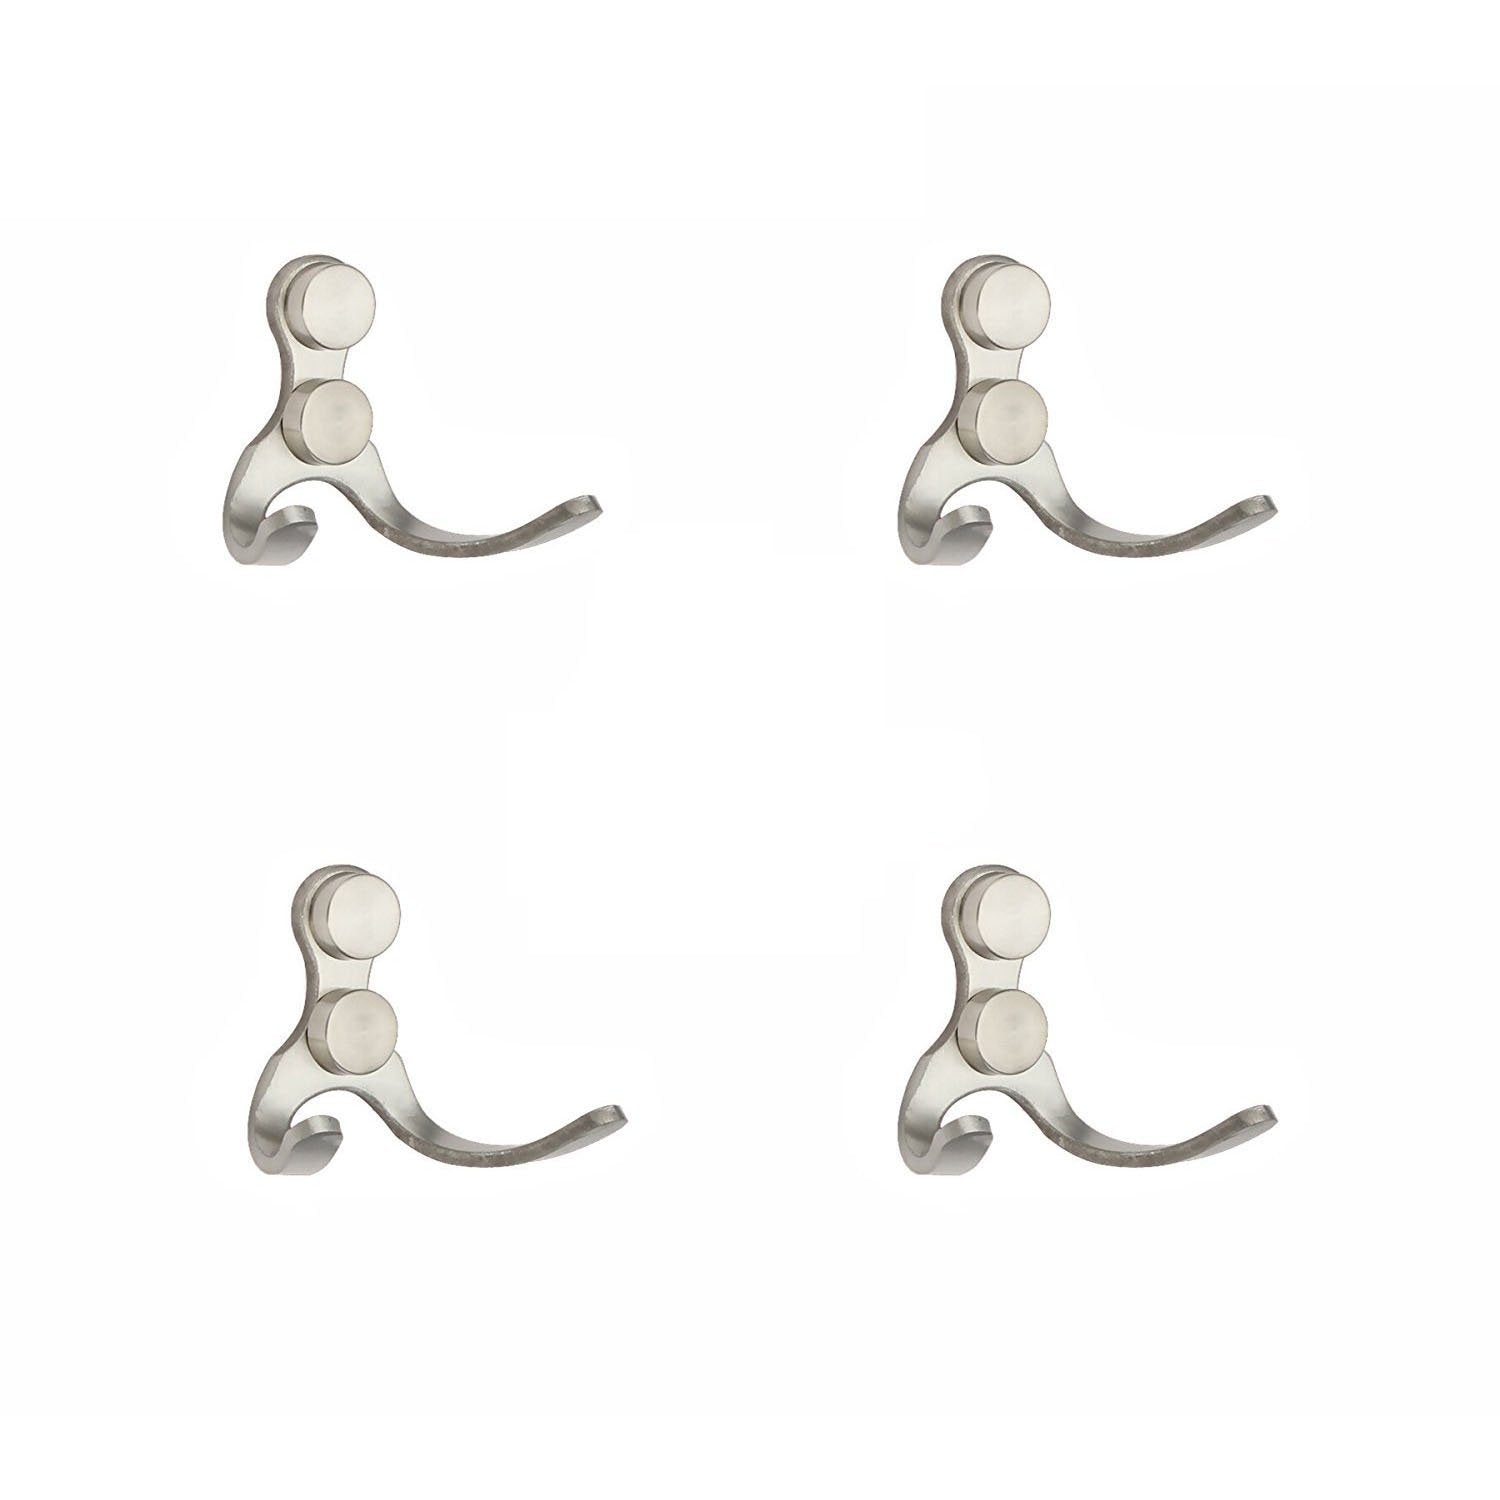 LonkerÂ stainless Double-ended coat hook, solid hook，For Home and Hotel Bedroom,Living room, Barth room and Shower room, 4 Set Pack in.